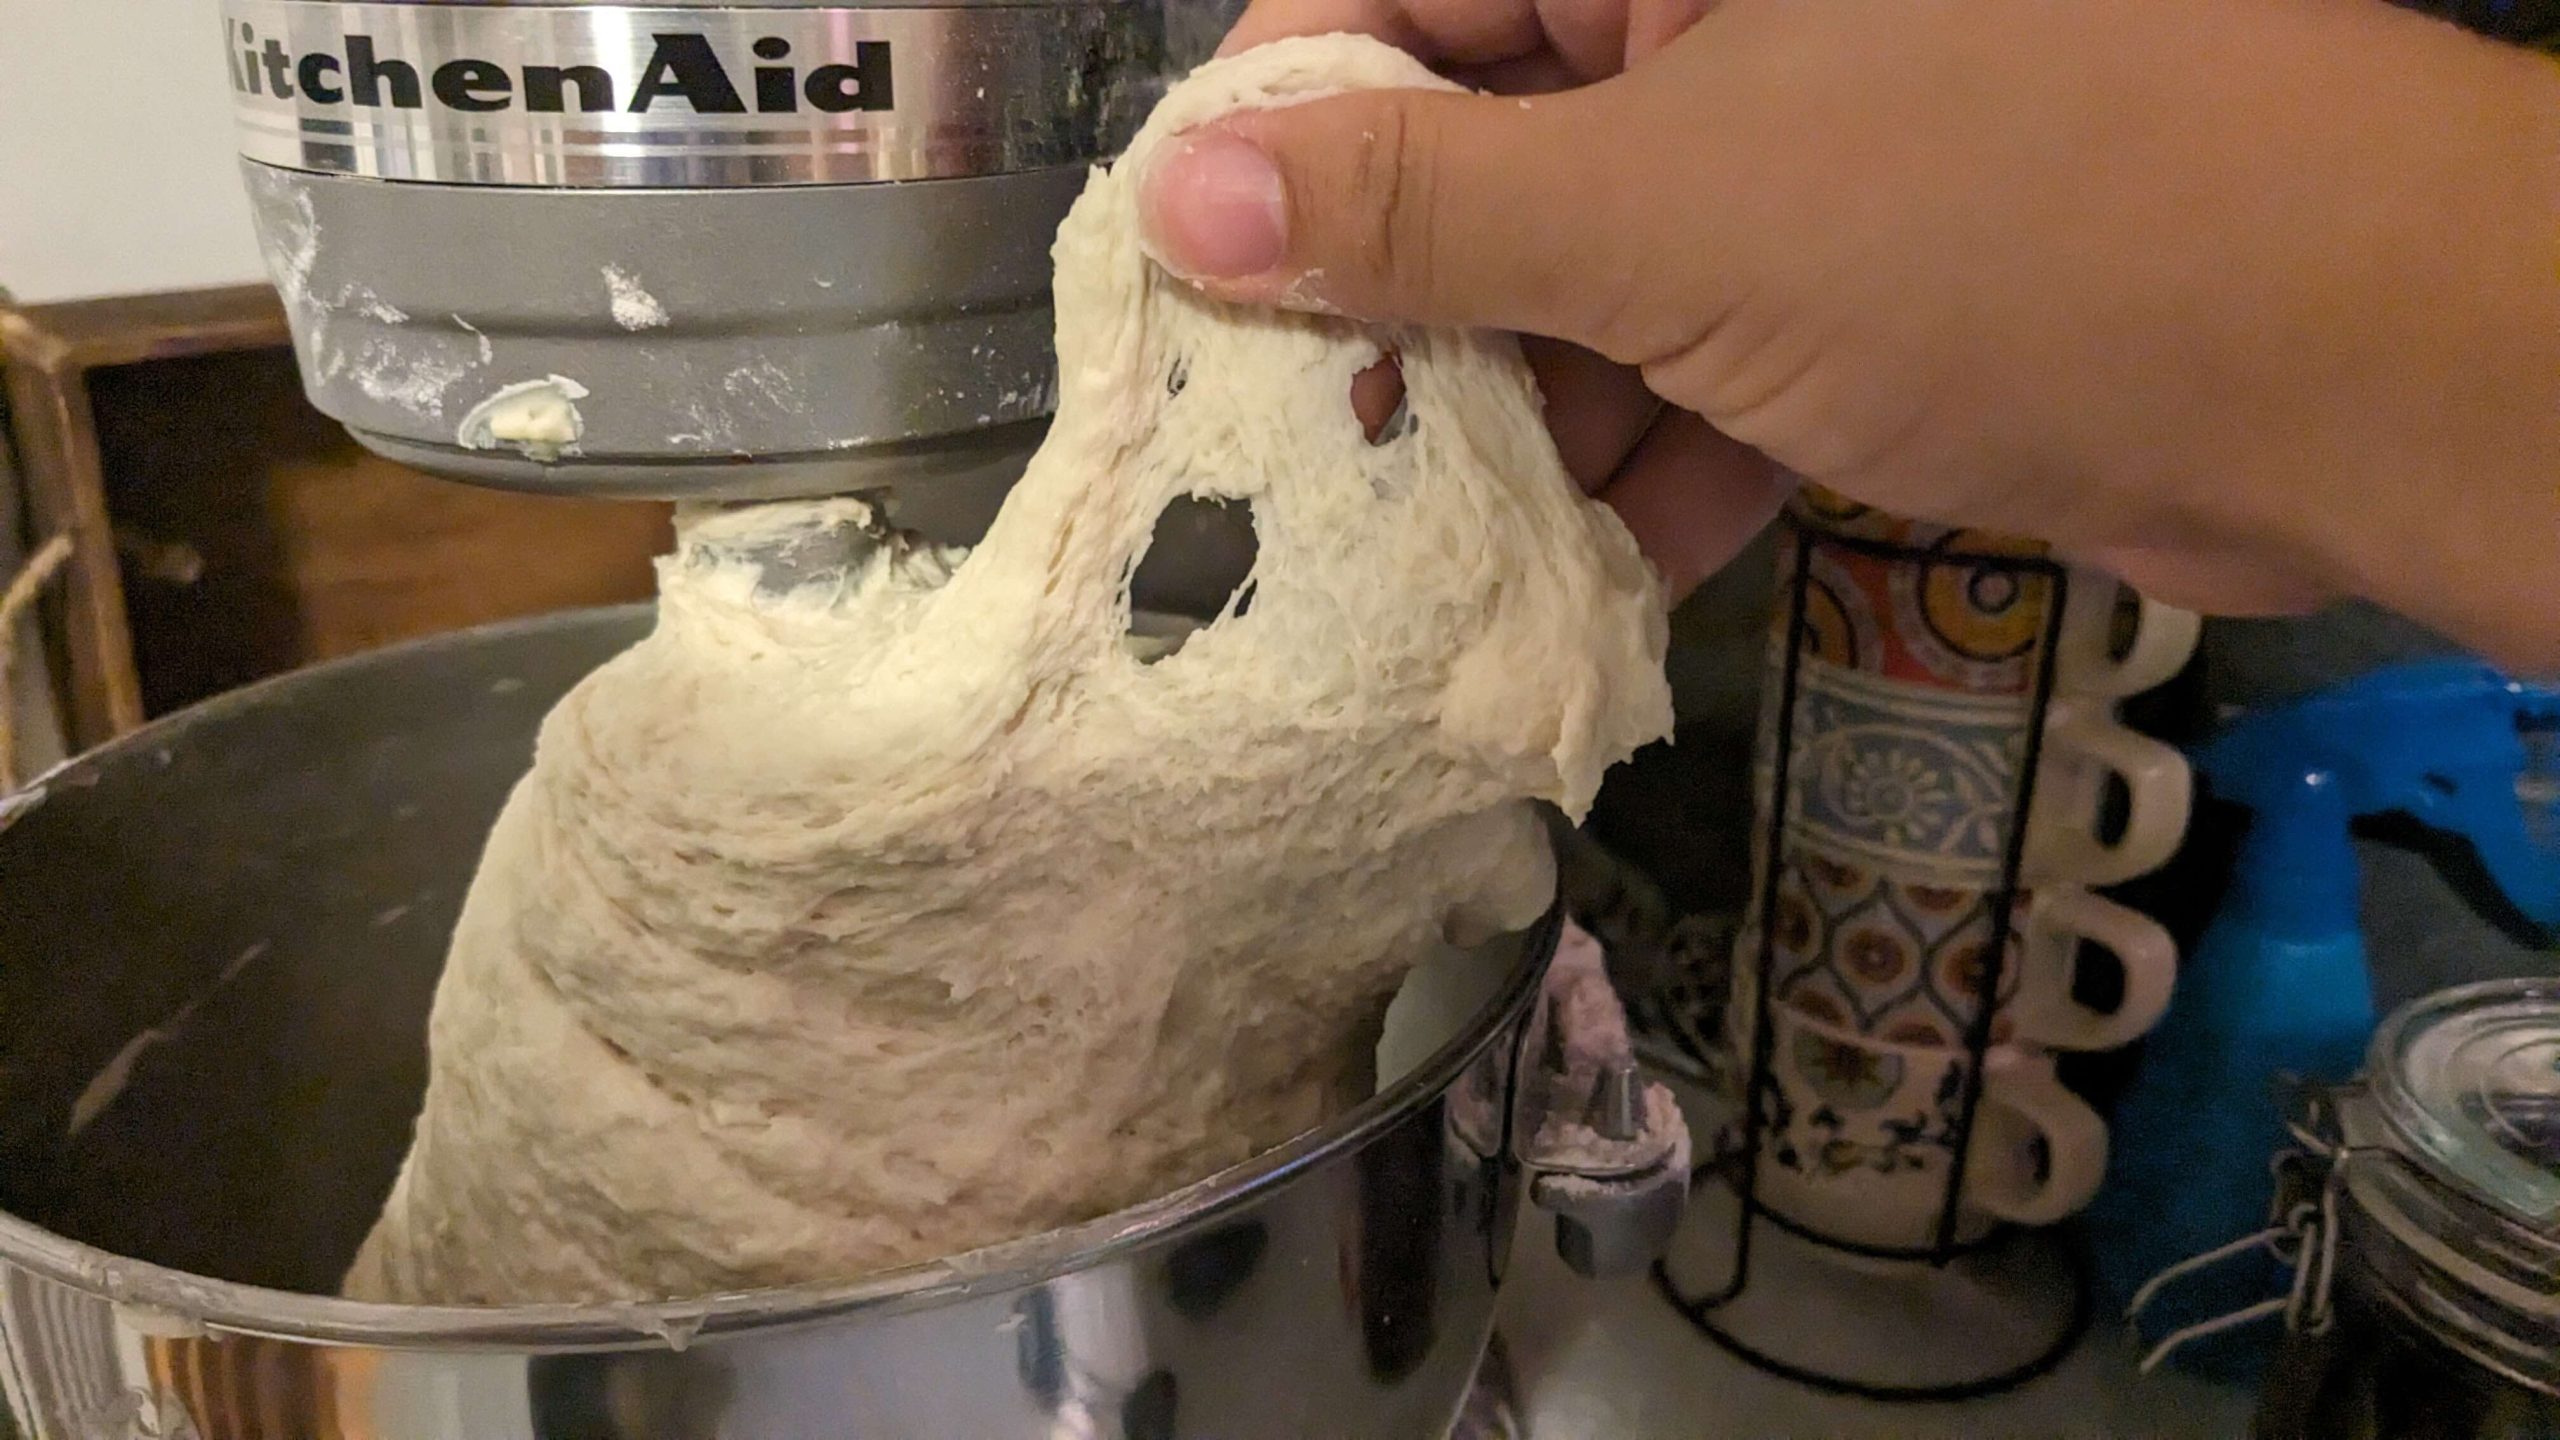 woman pulling dough out of a kitchen aid mixer